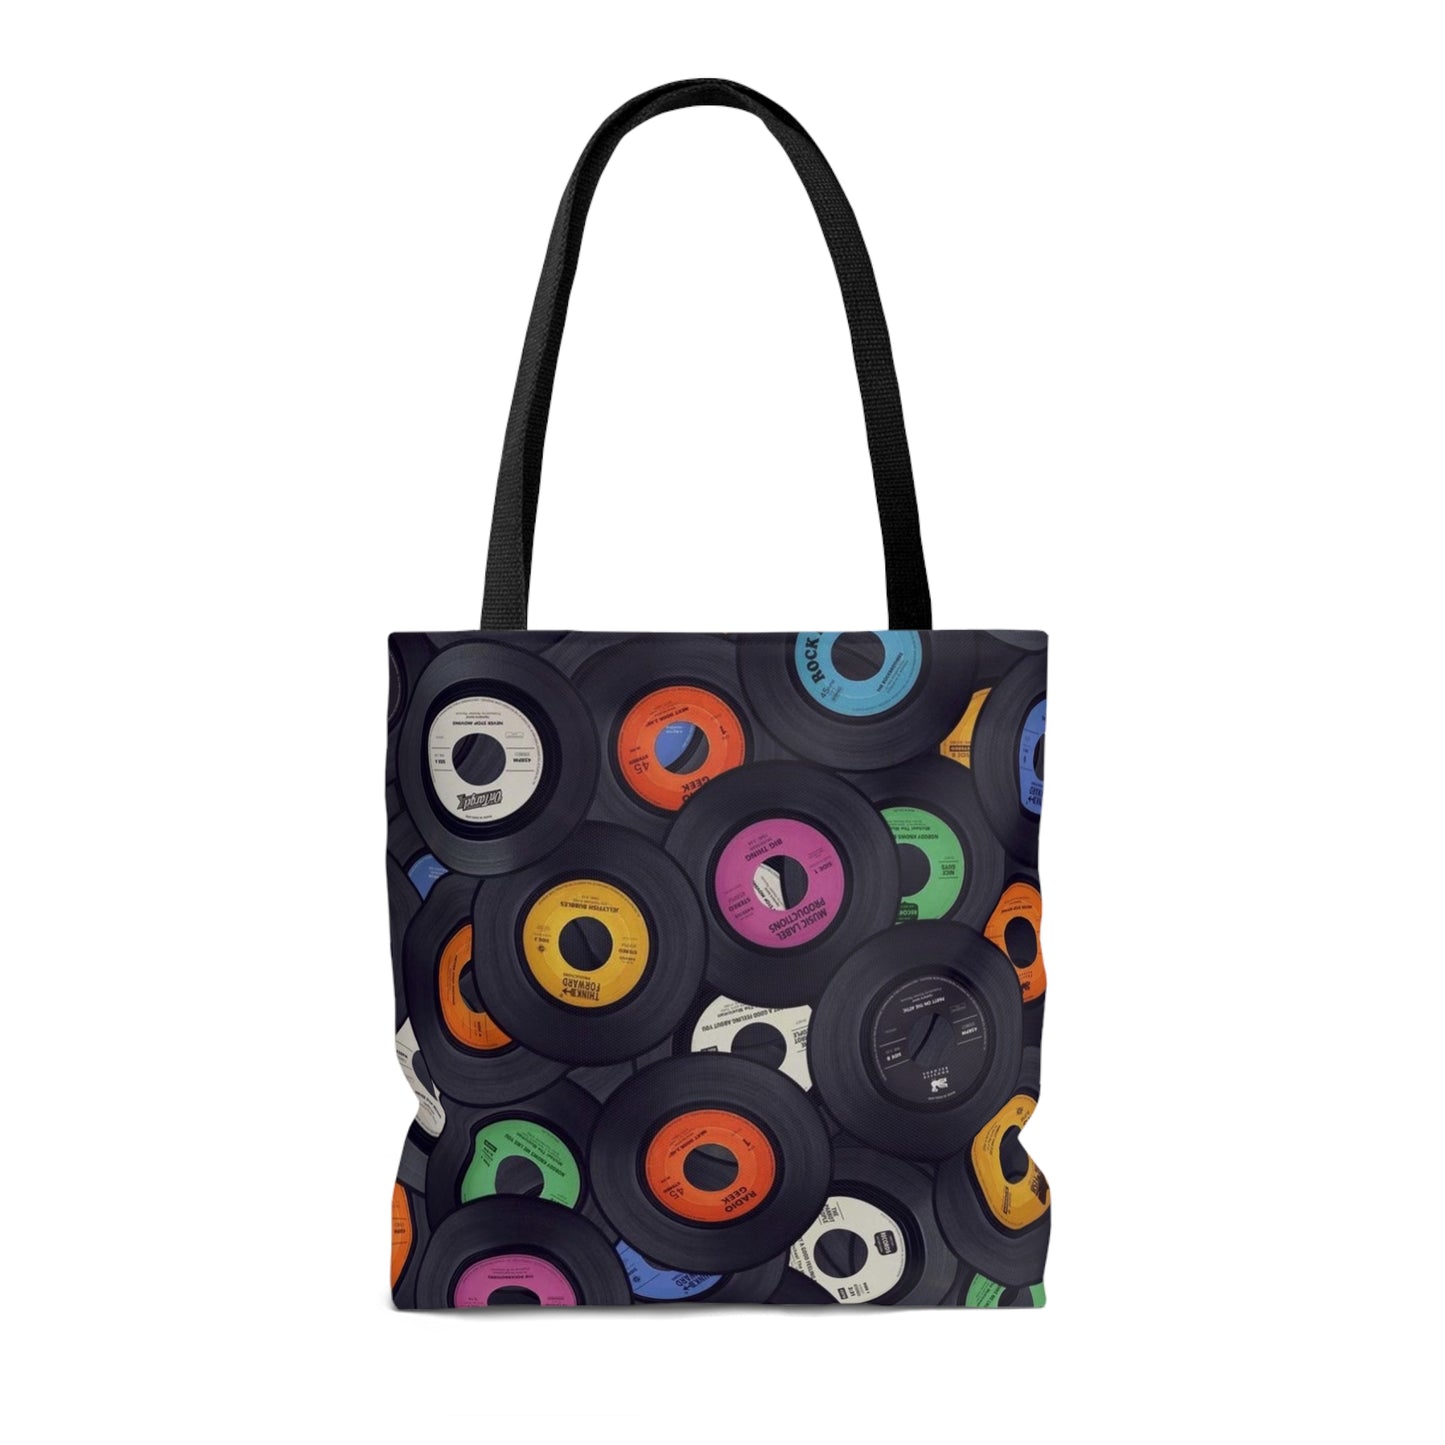 DOPiFiED tote bag